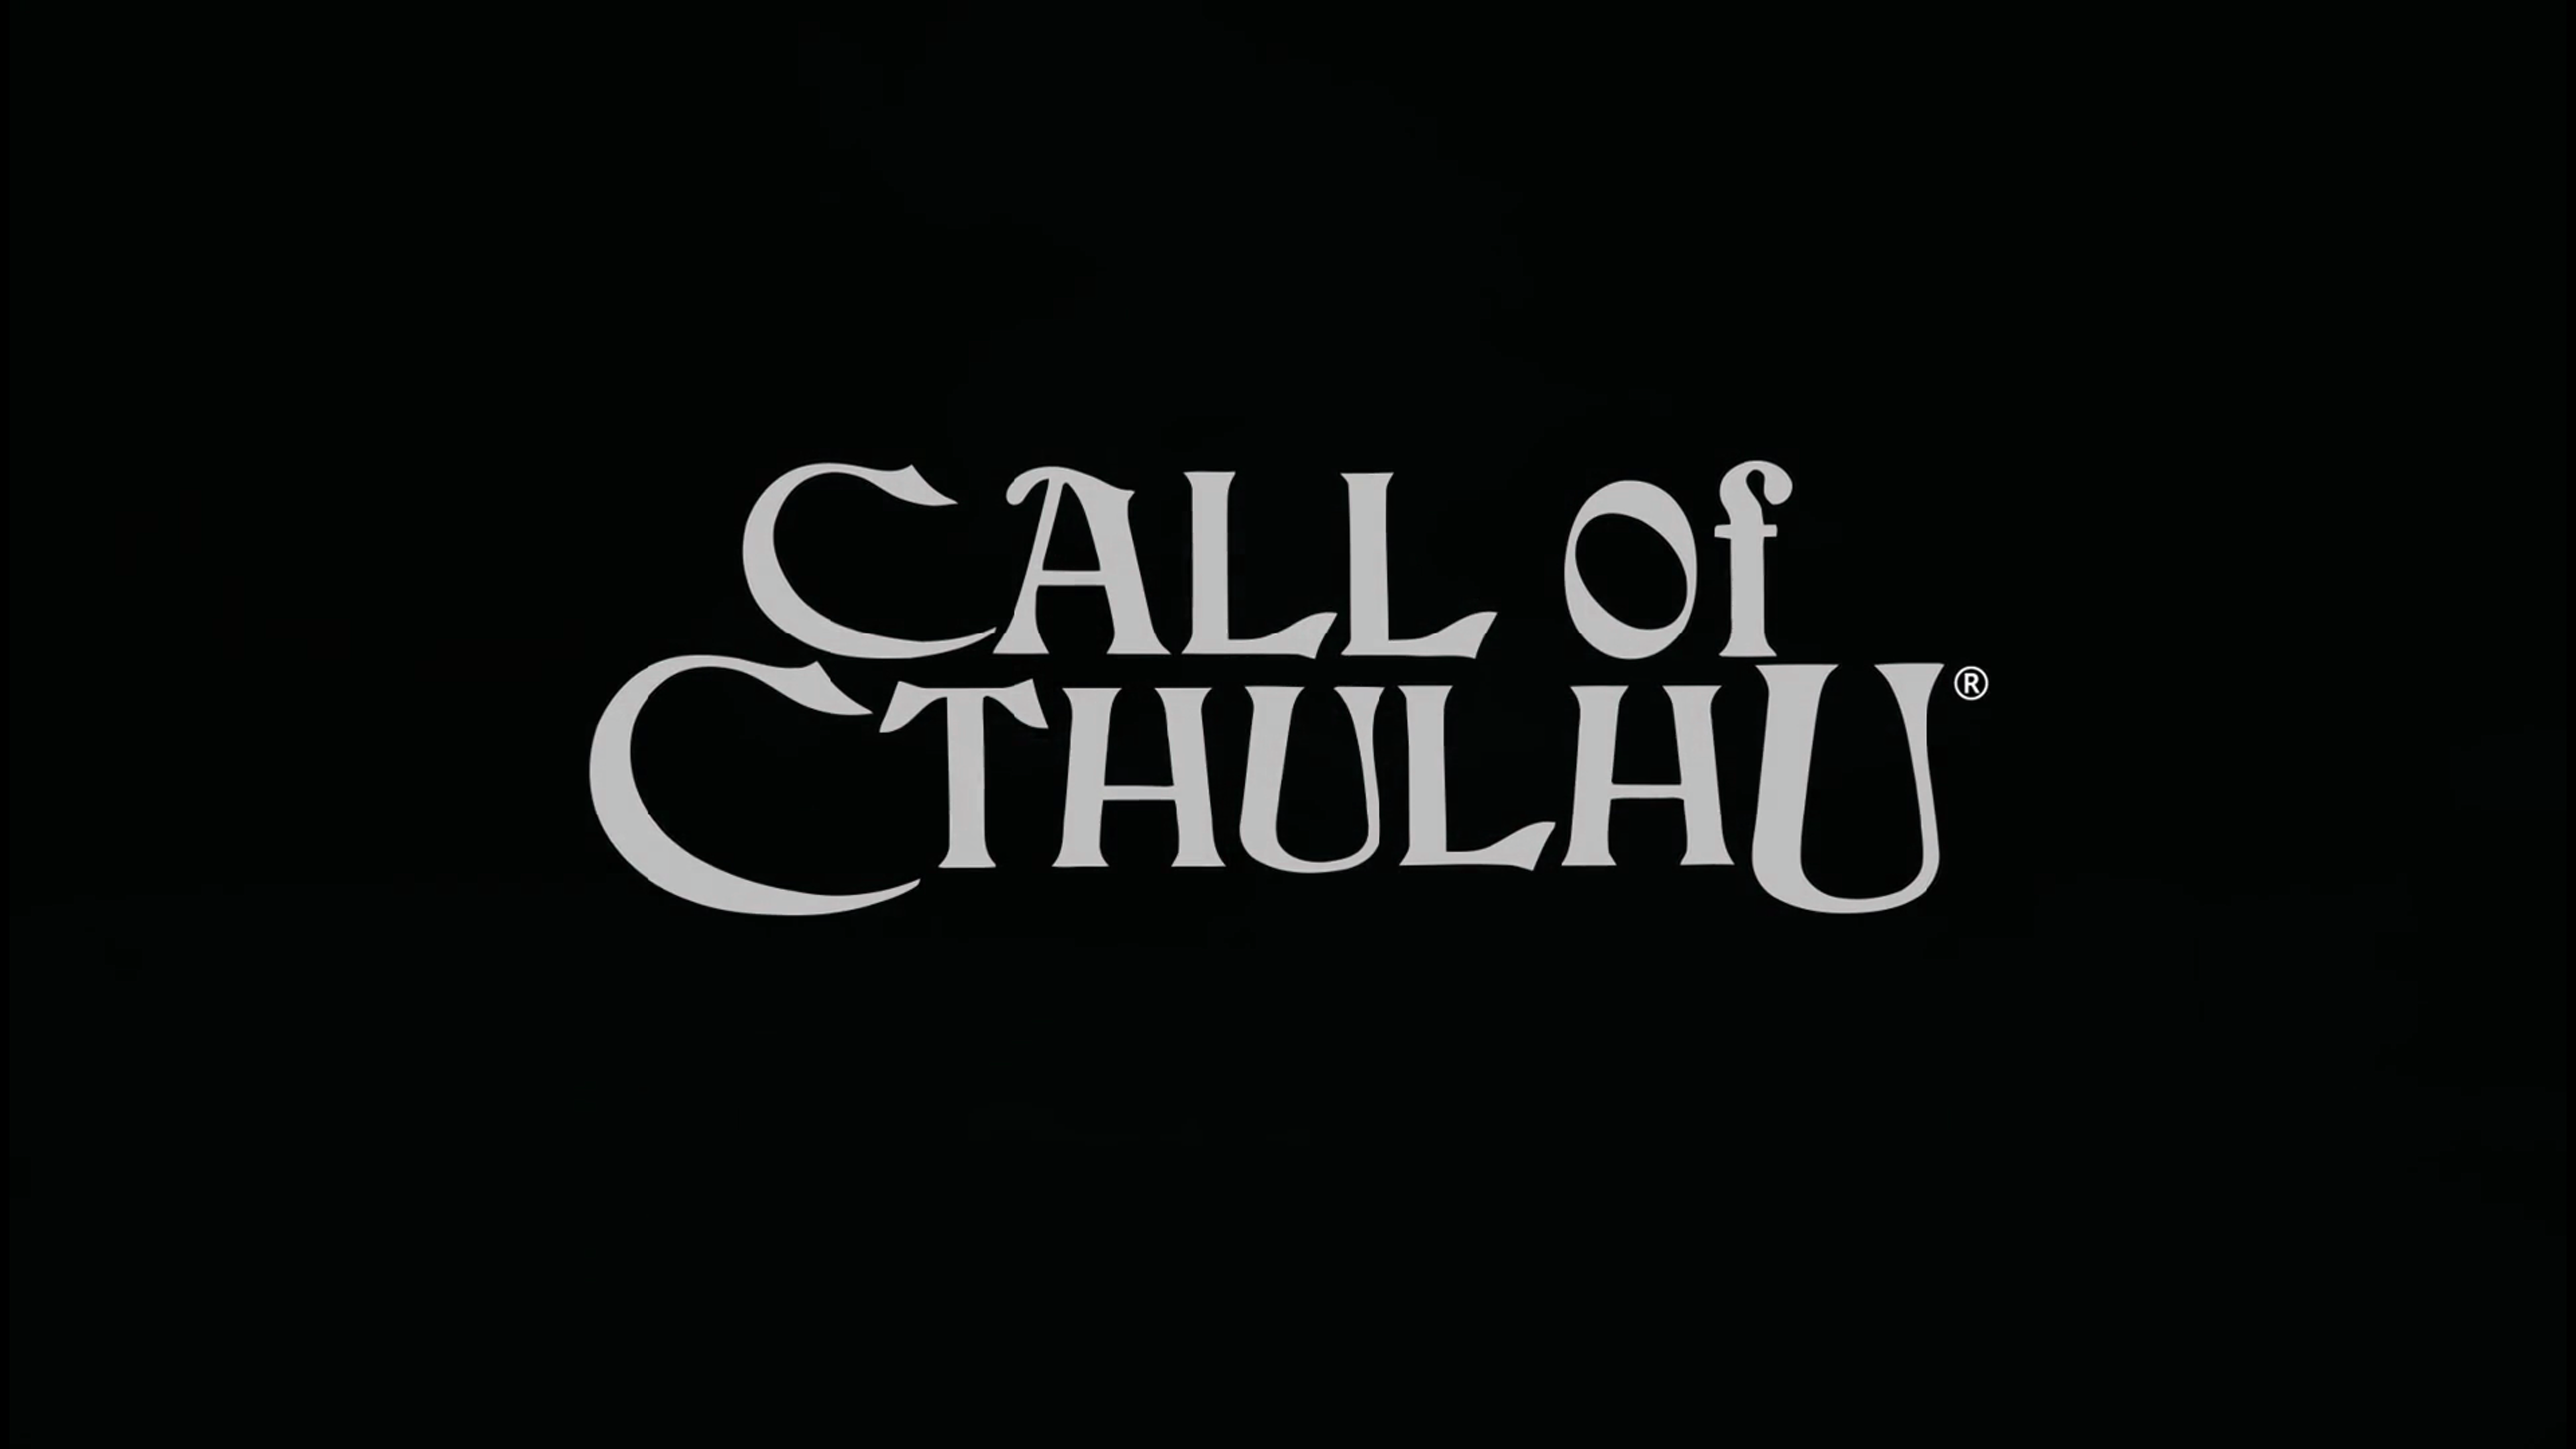 Call of Cthulhu 2020-08-21 21-49-43.png